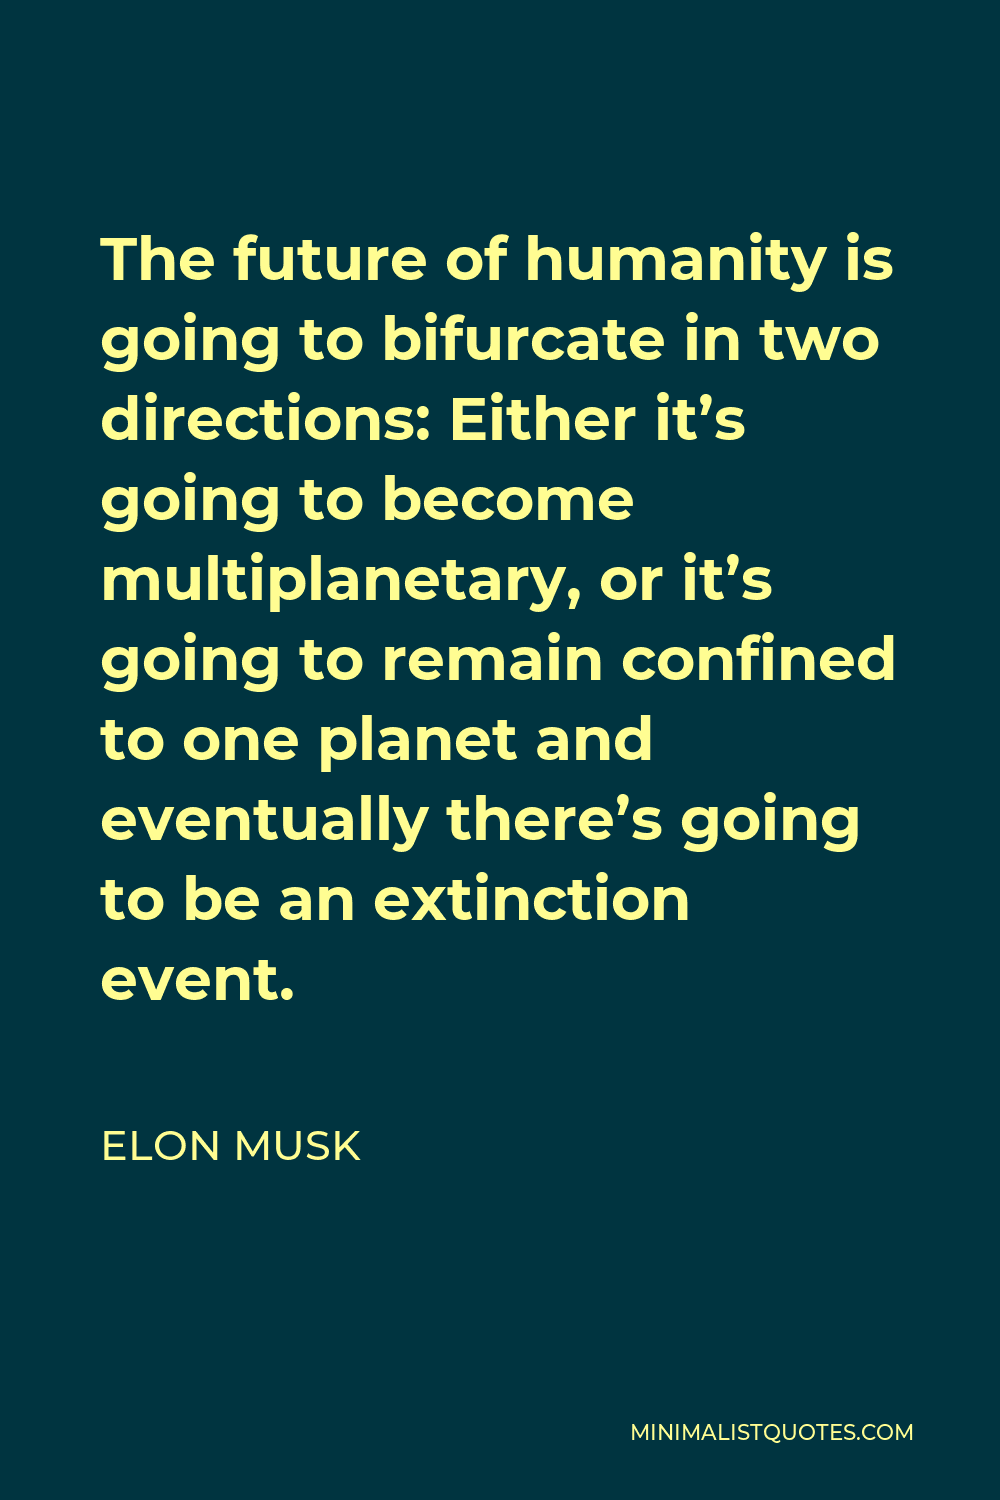 Elon Musk Quote - The future of humanity is going to bifurcate in two directions: Either it’s going to become multiplanetary, or it’s going to remain confined to one planet and eventually there’s going to be an extinction event.